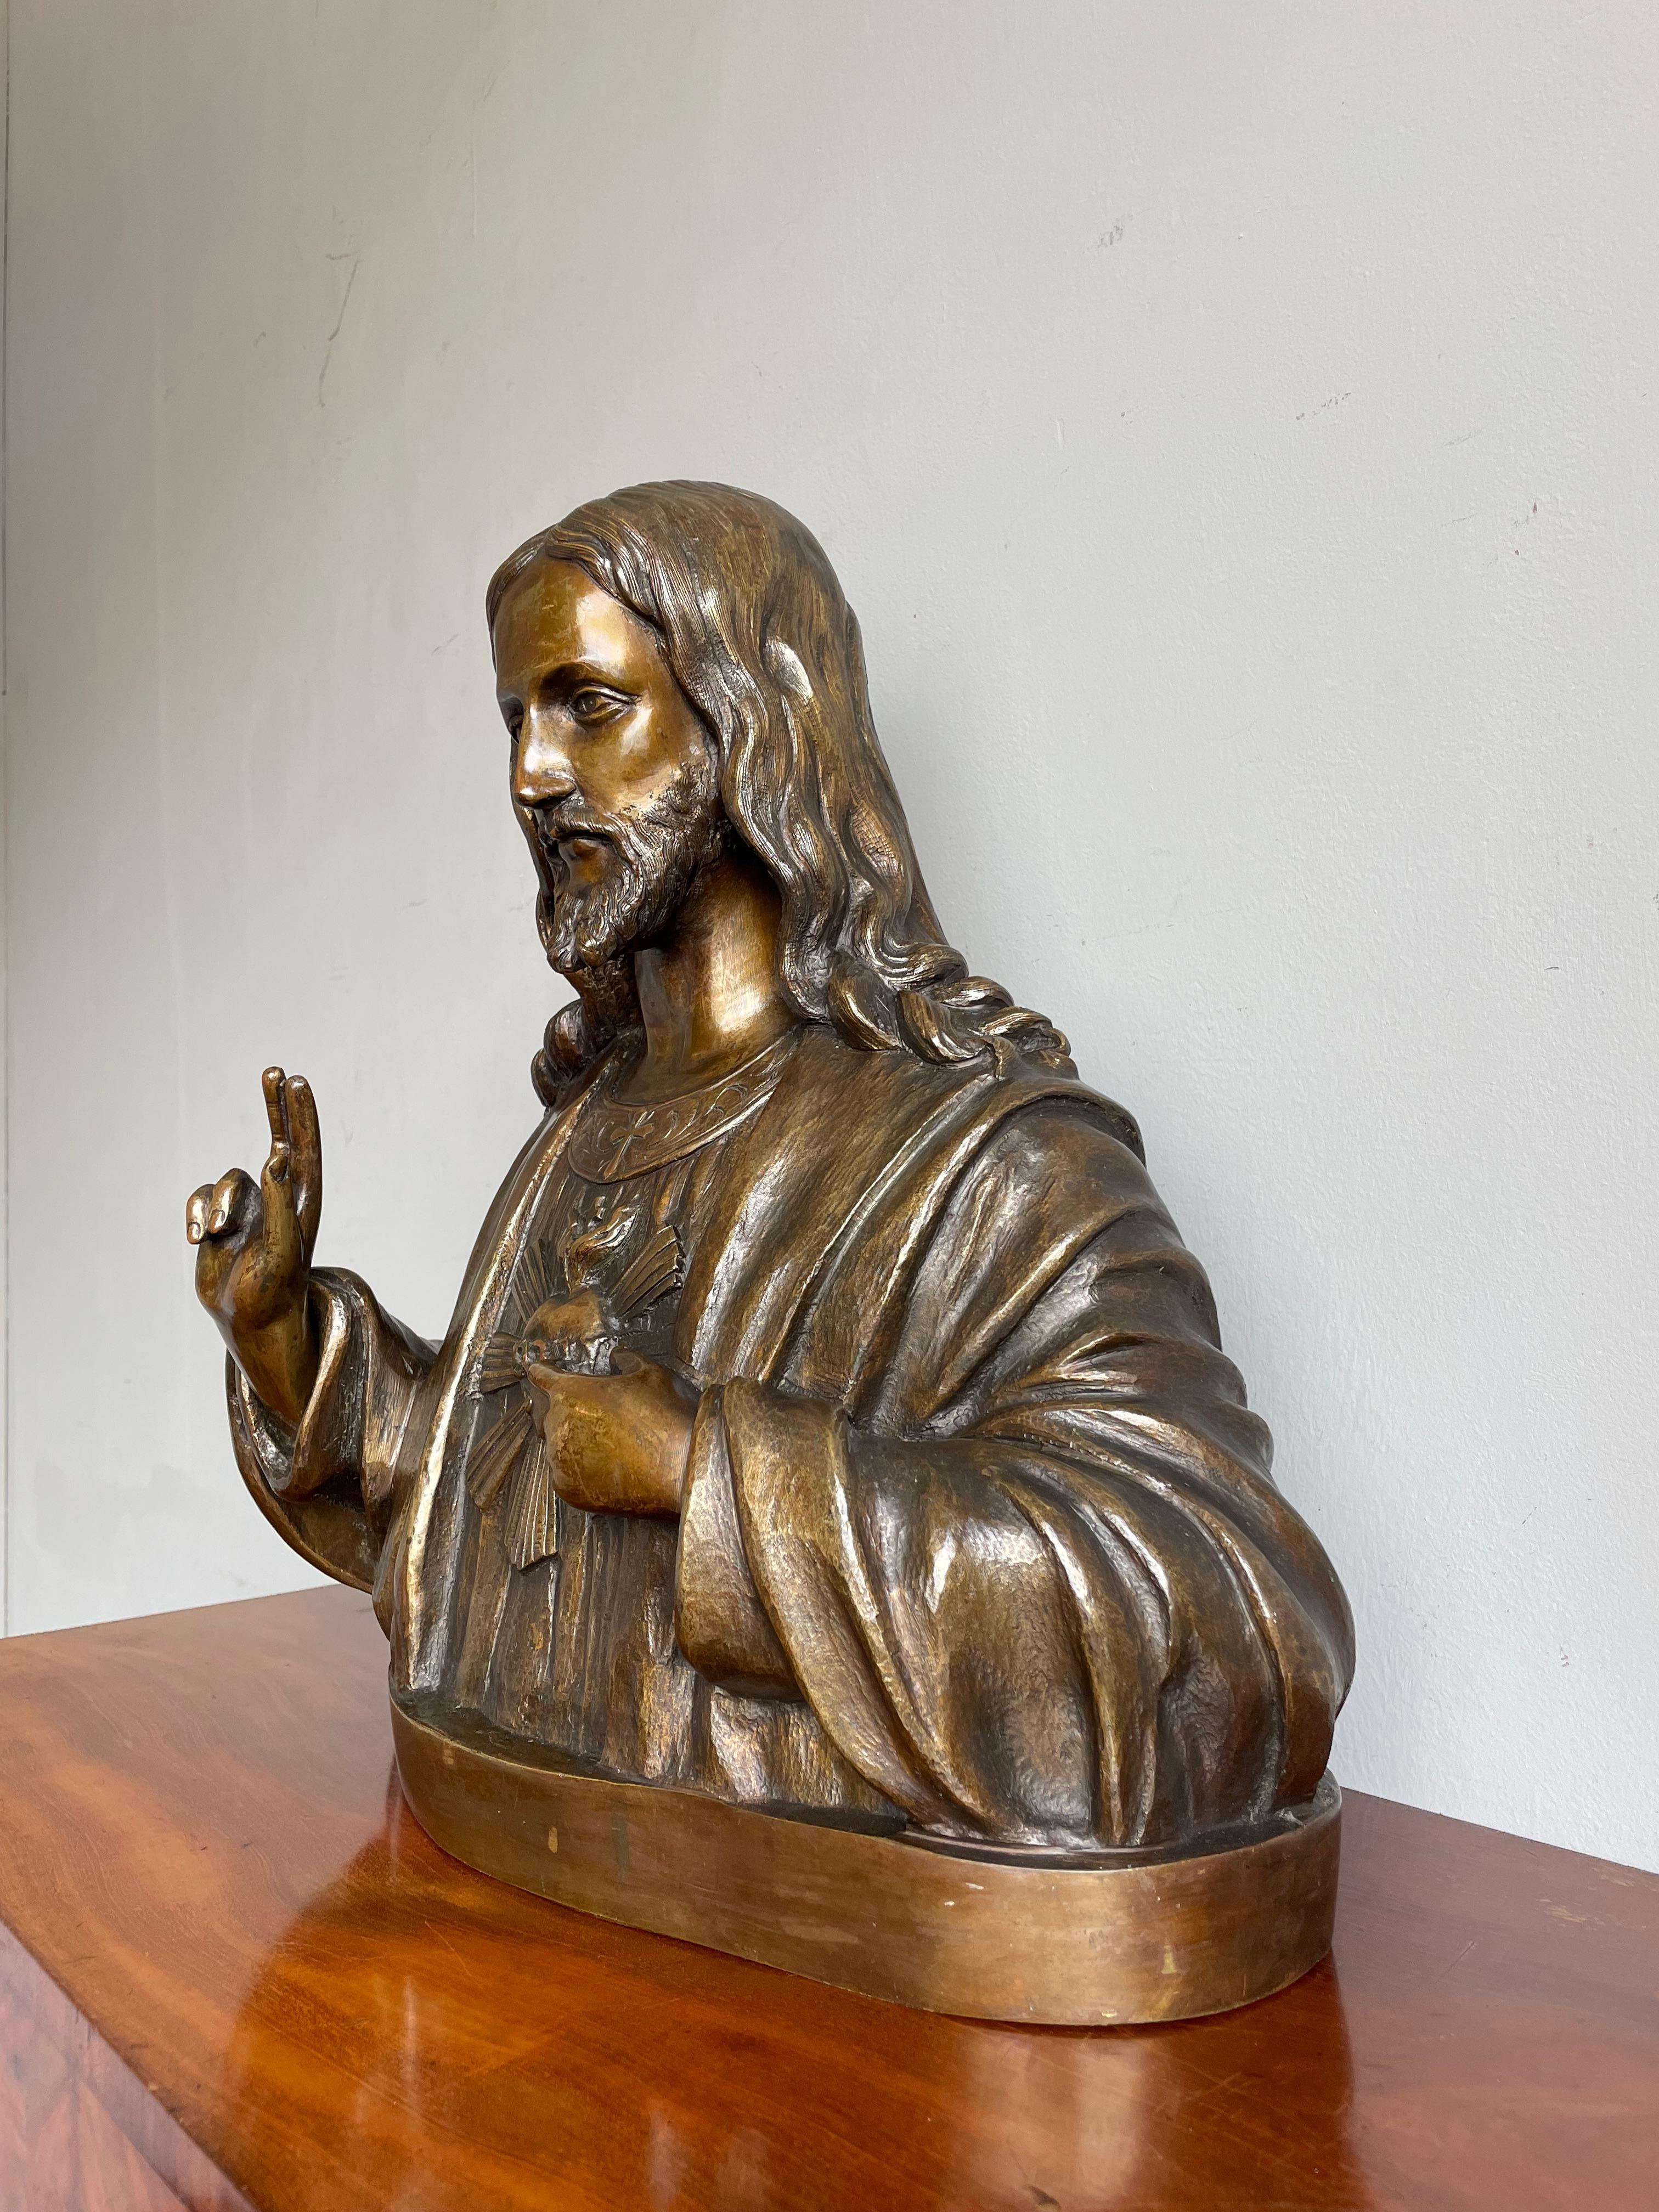 Cast Rare Antique Bronze Holy Heart Sculpture / Bust of Our Lord Jesus Christ 1920 For Sale